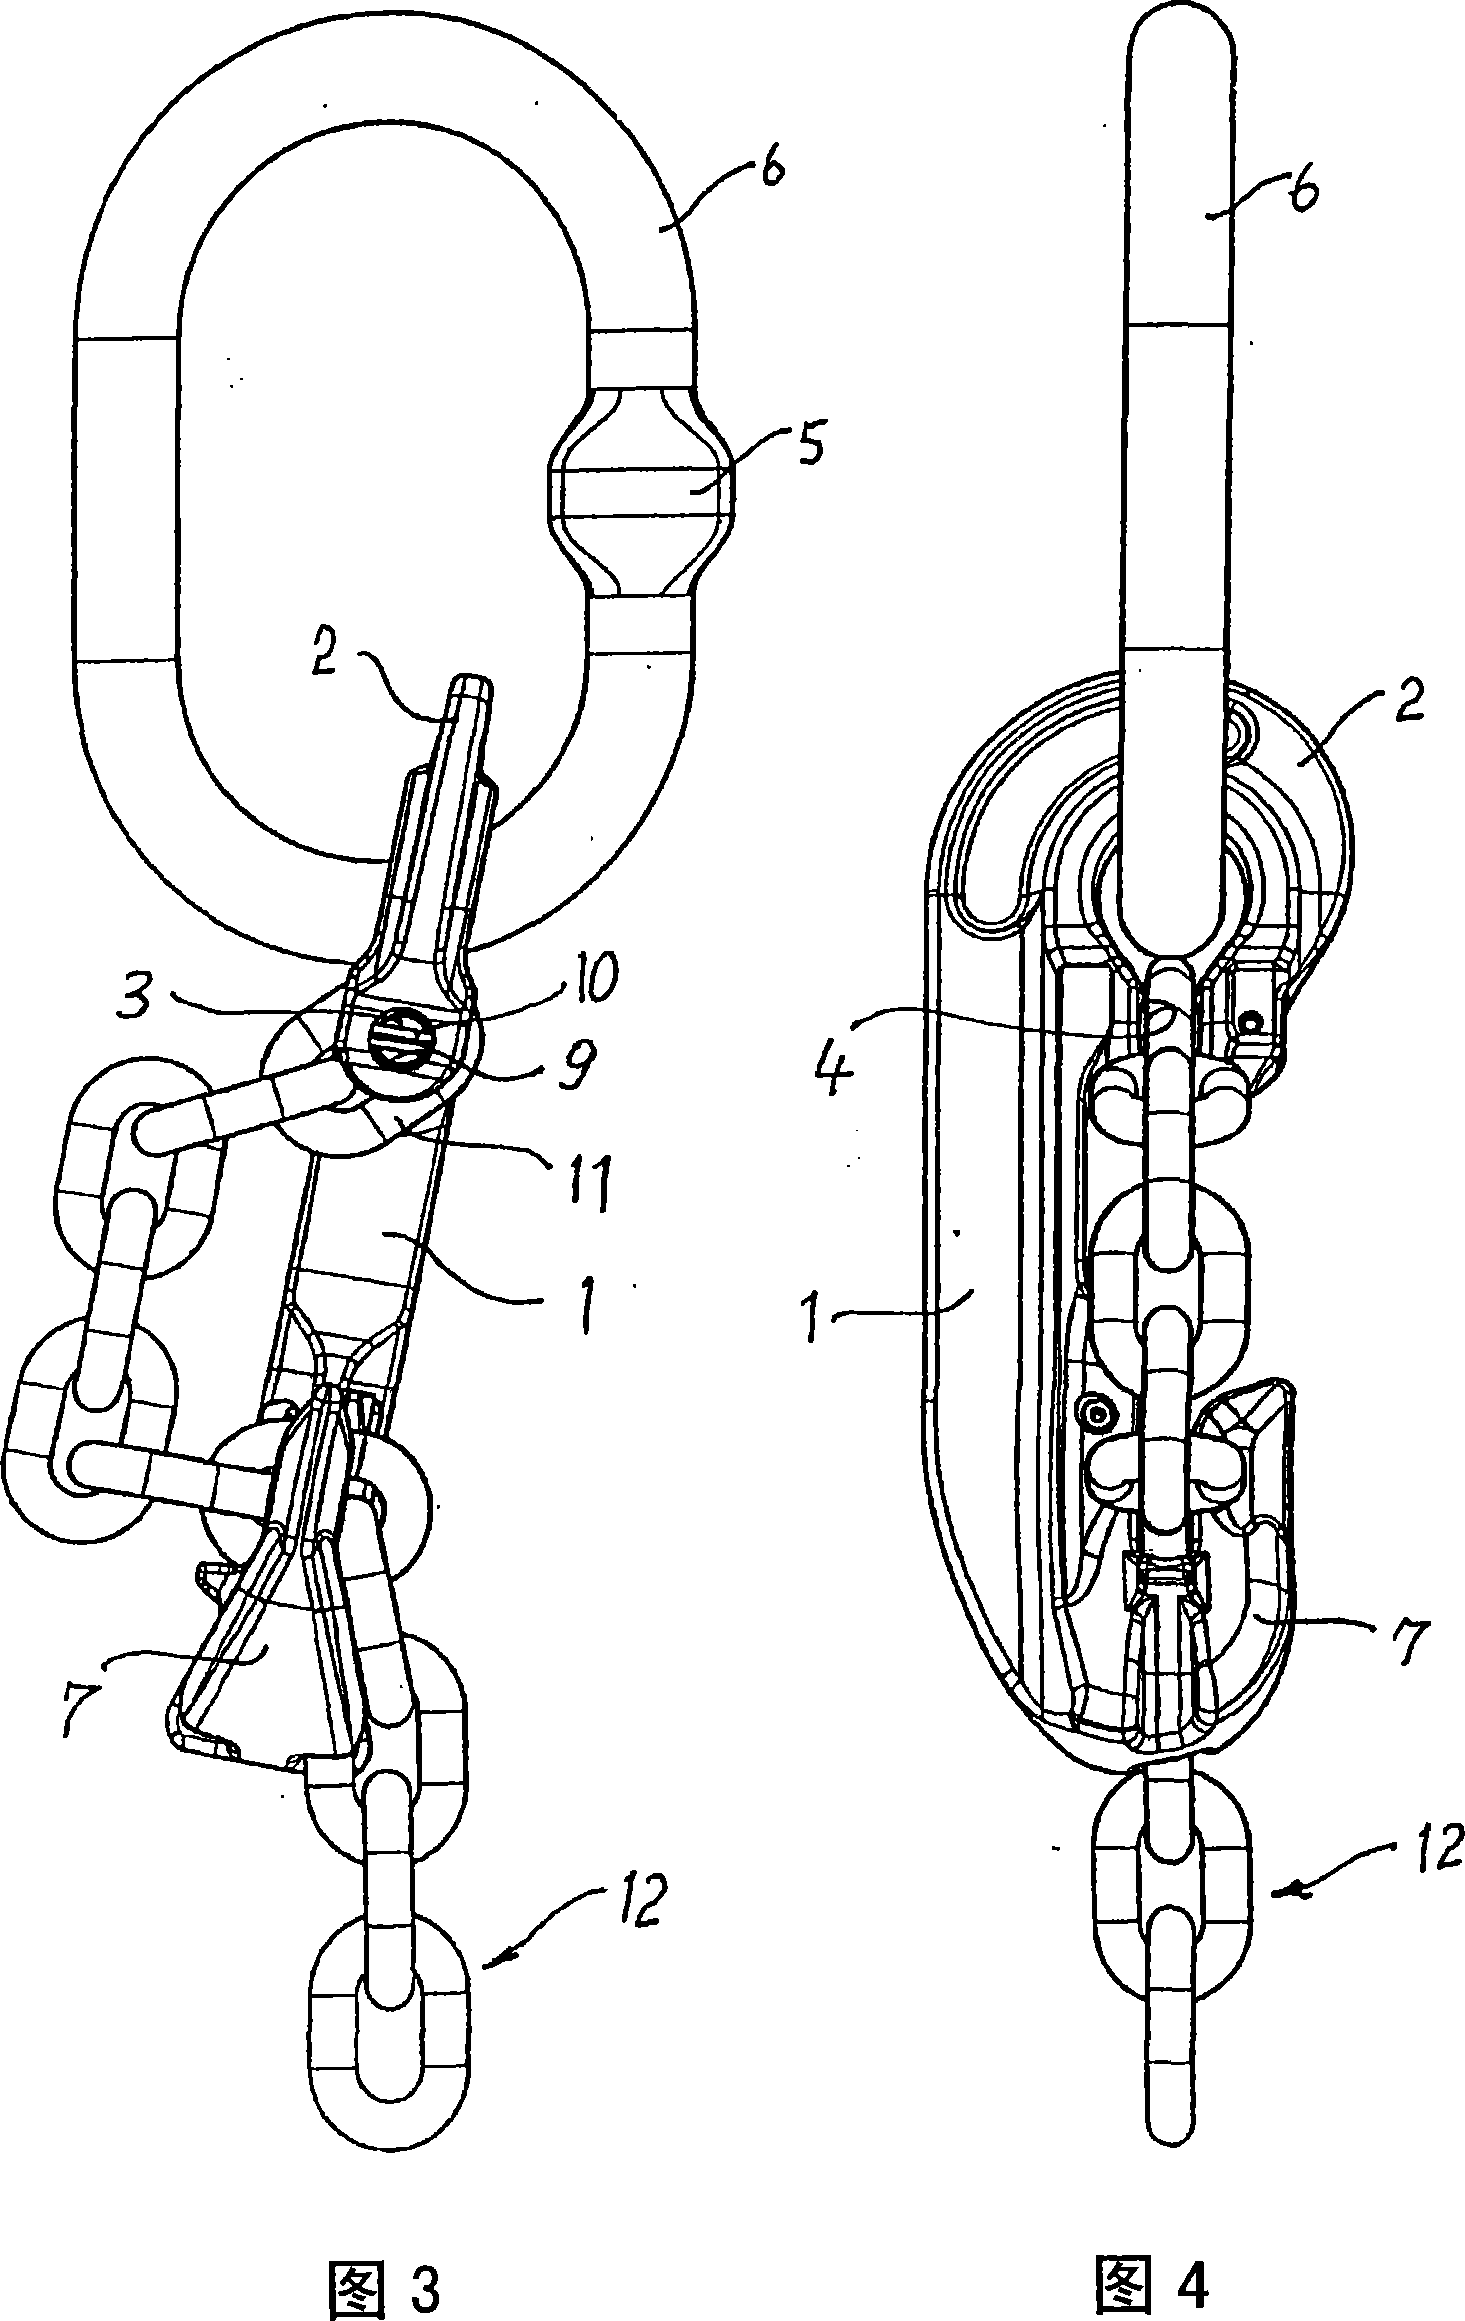 Component for shortening chains